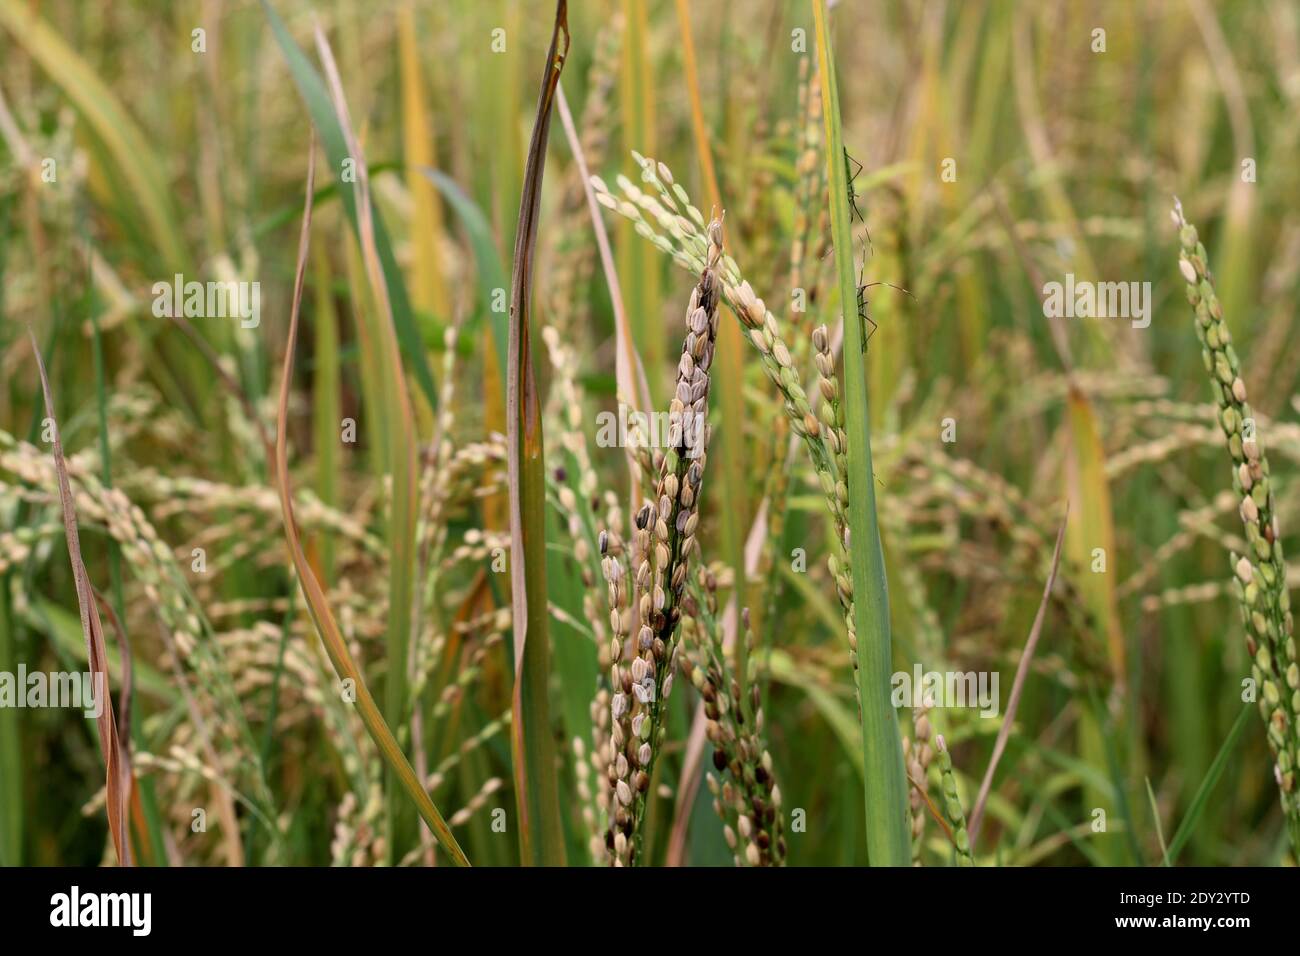 Two mature paddy spikes in the paddy field,one of them has good seeds well as bad seeds Stock Photo